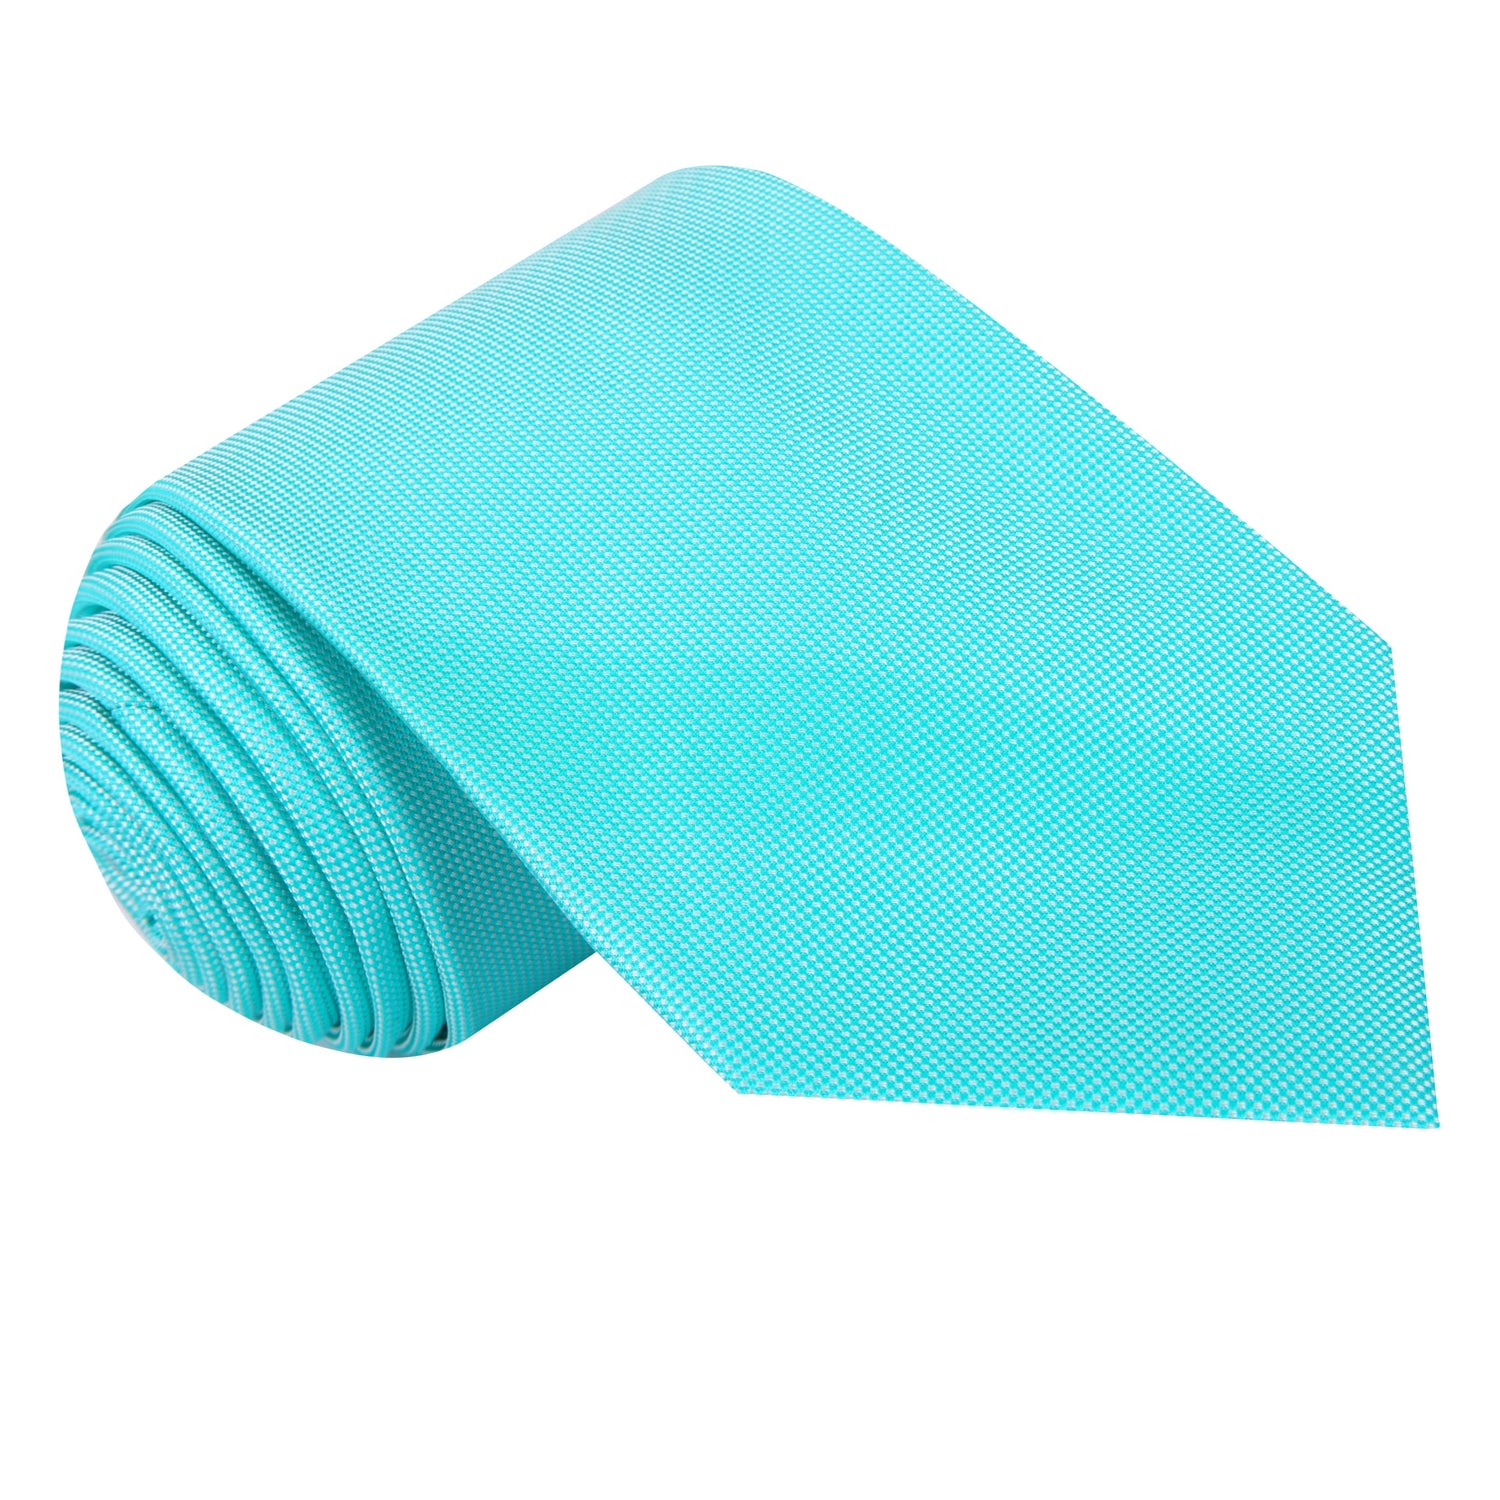 A Solid Mint Tie With Small Check Texture Pattern Silk Necktie